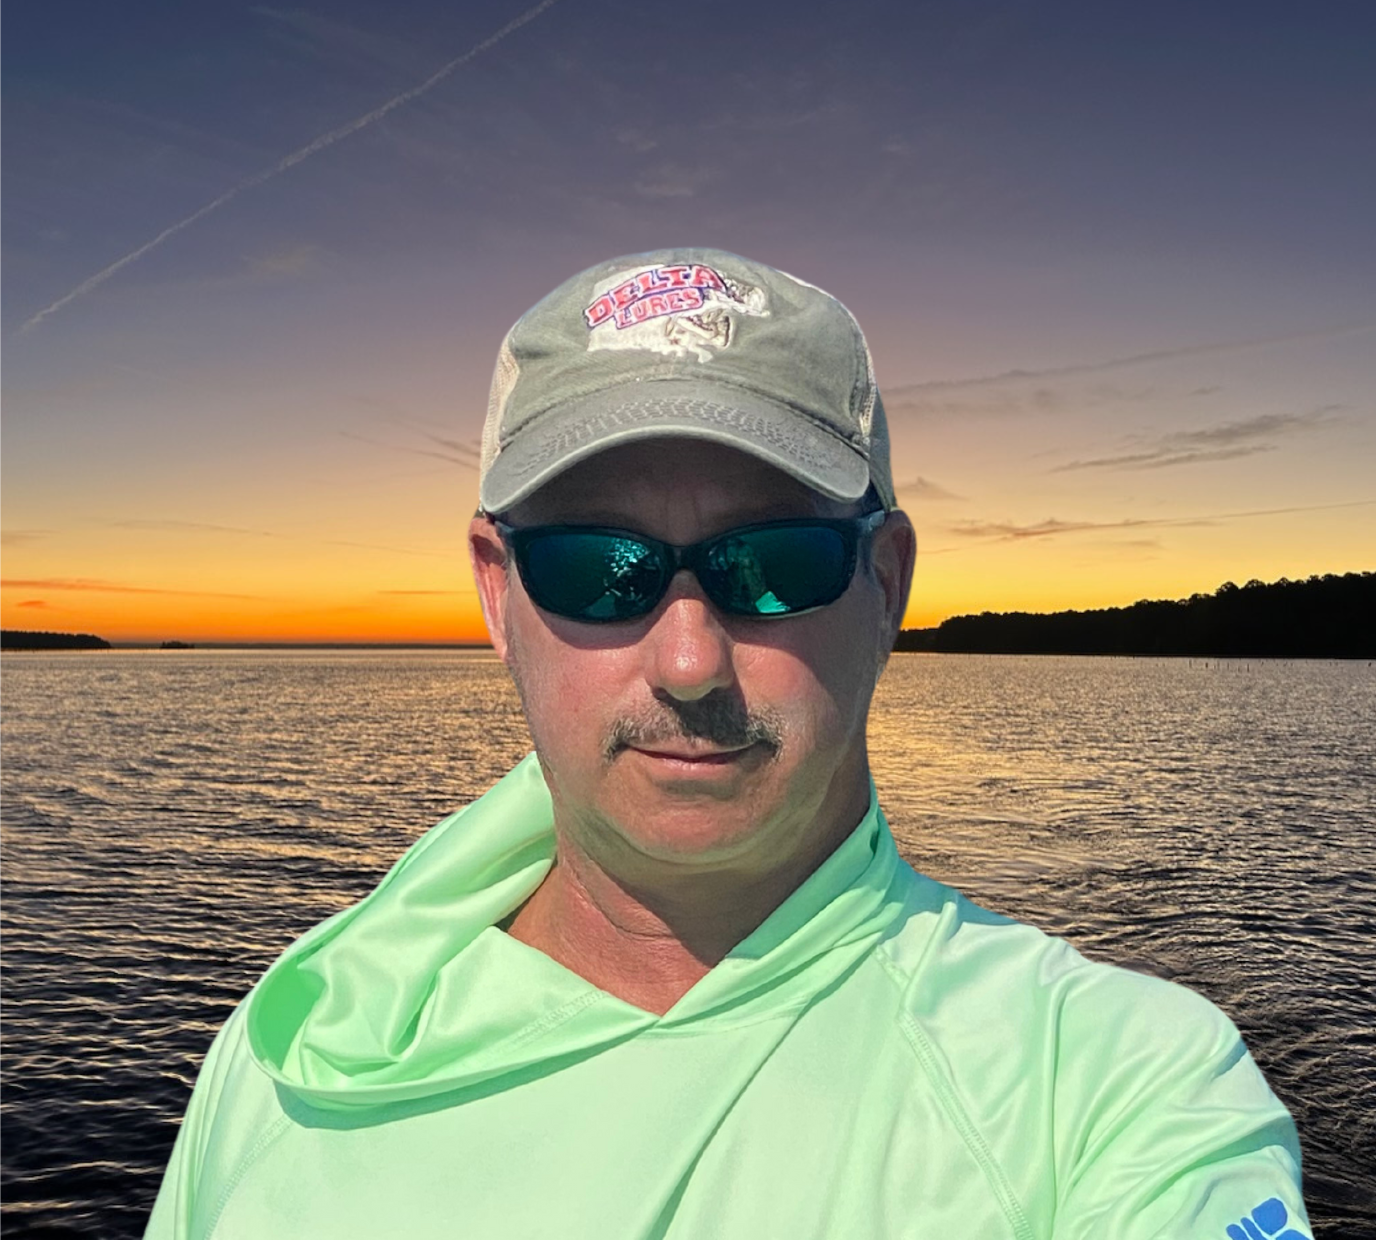 a man wearing sunglasses and a hat is standing in front of a body of water .